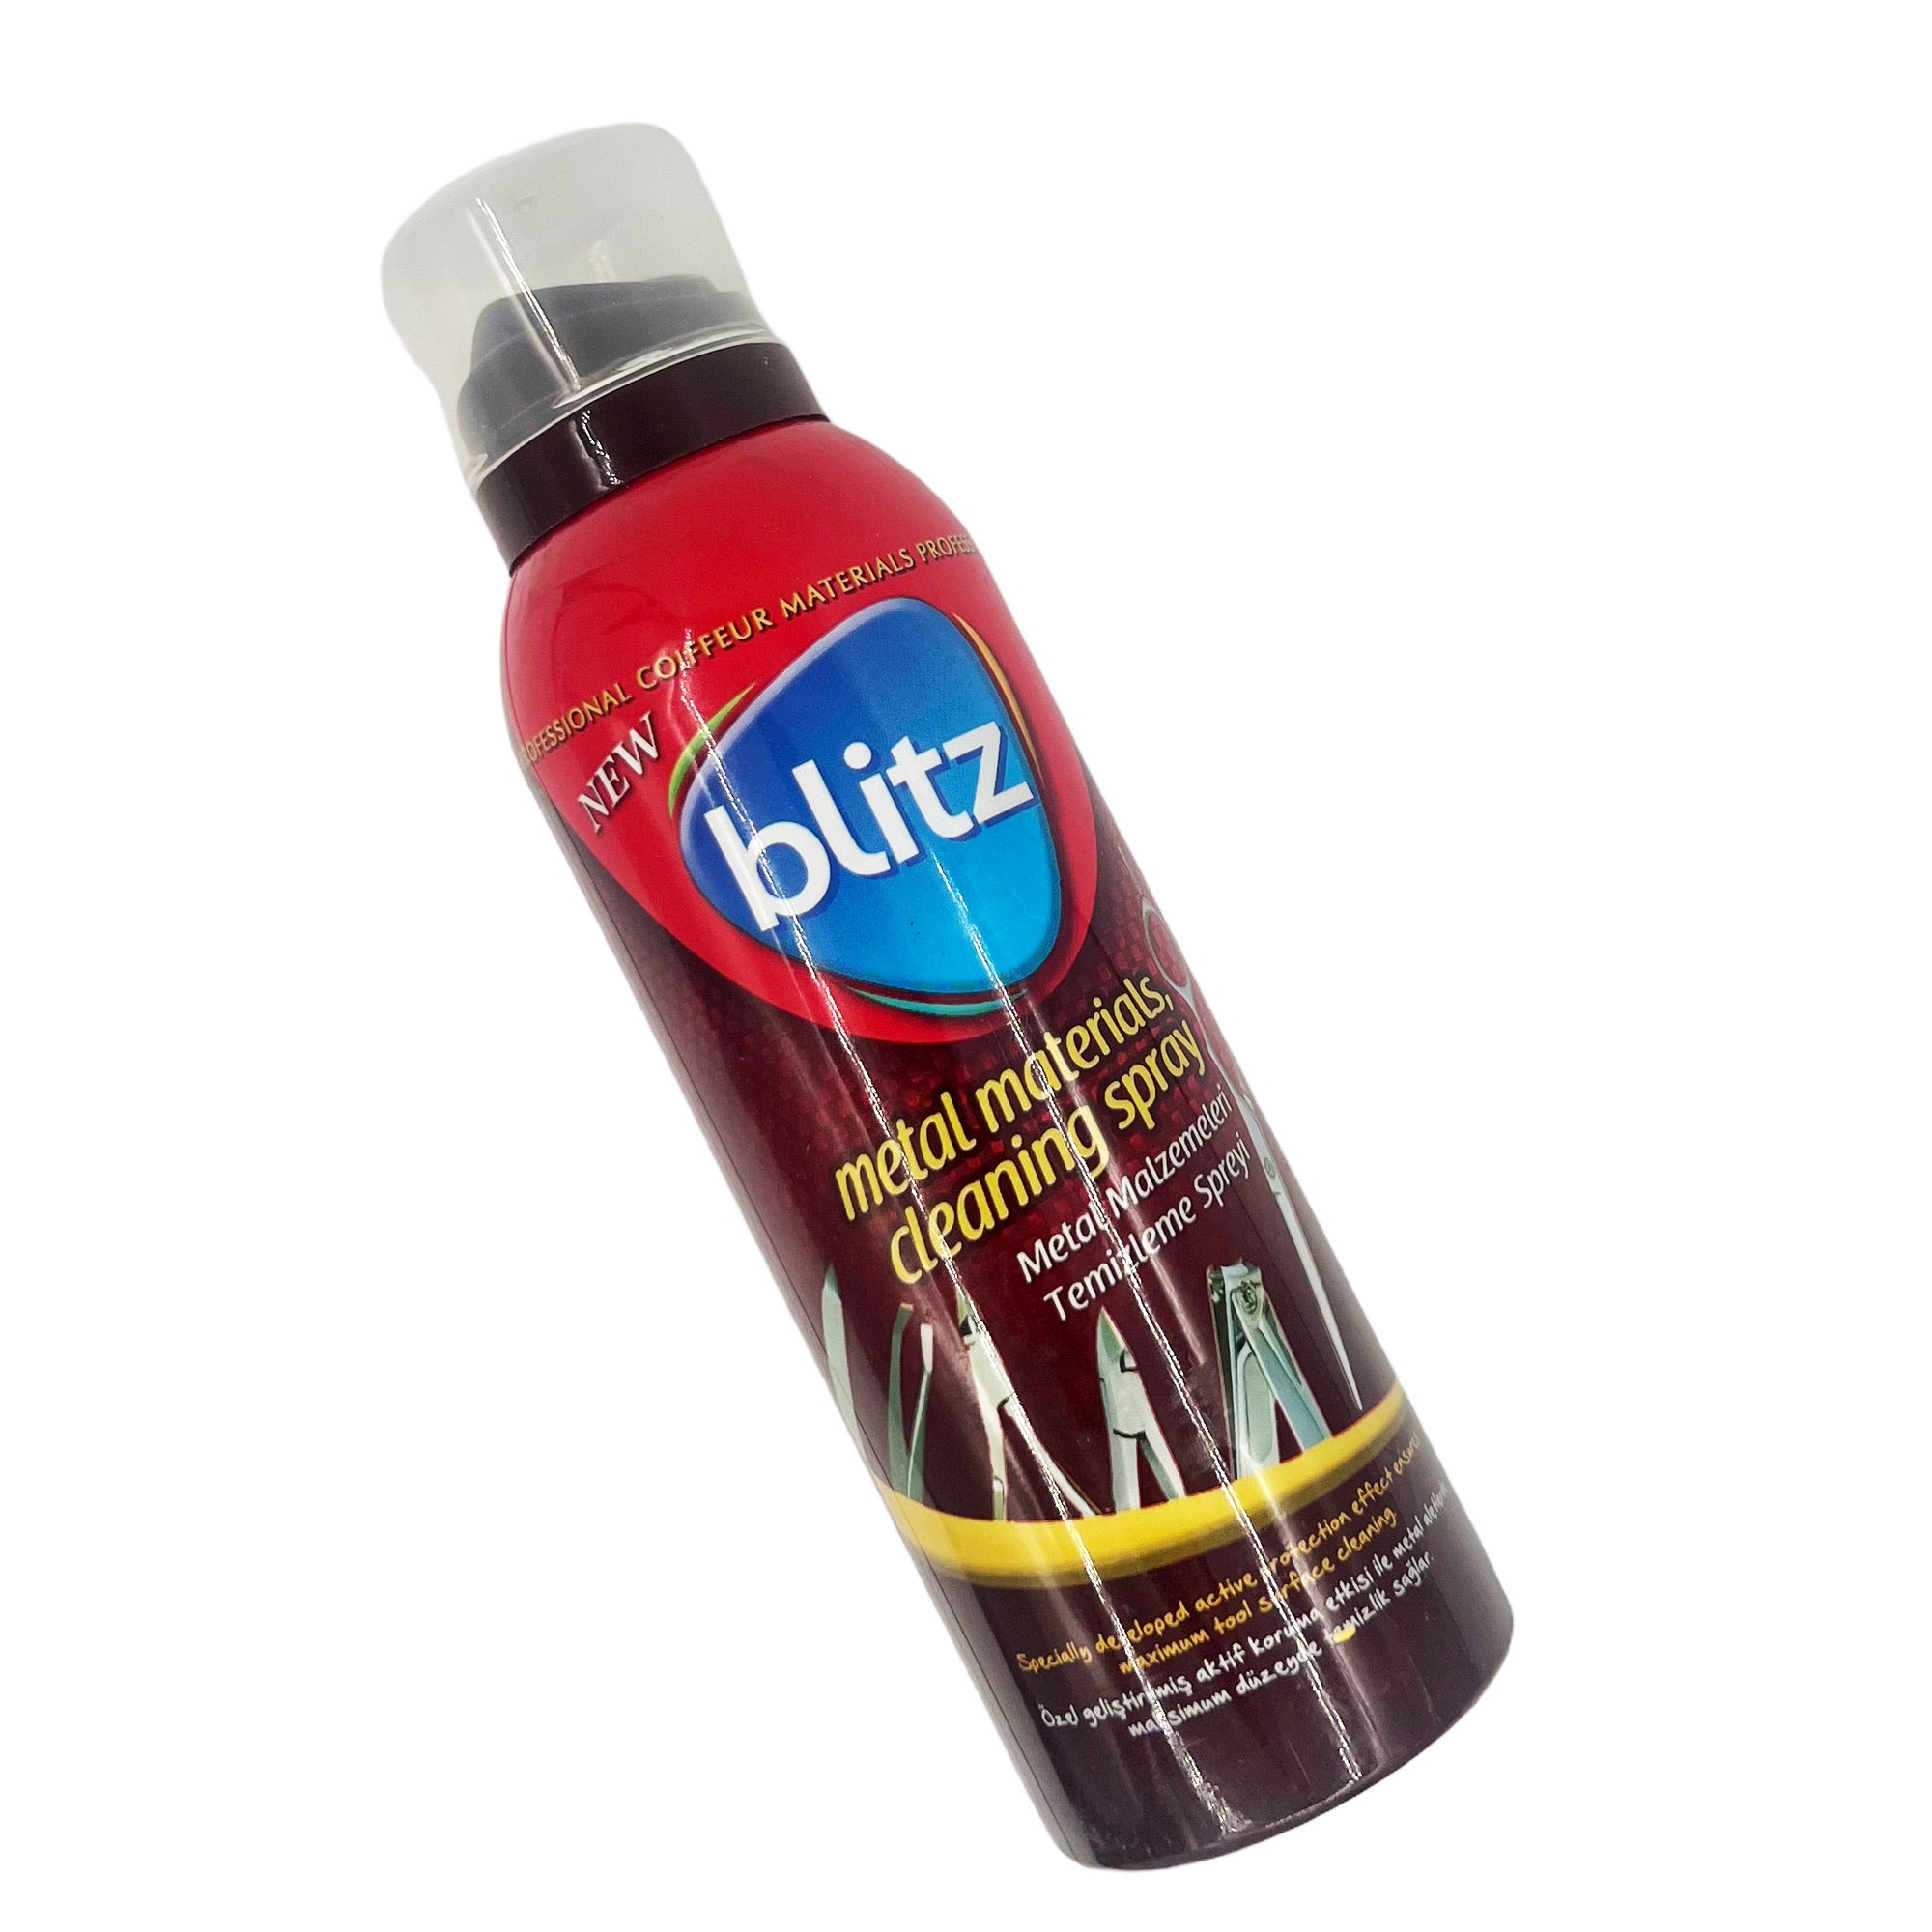 Blitz - Metal Materials Cleaning Spray for Barber & Salon Tools 150ml - Eson Direct